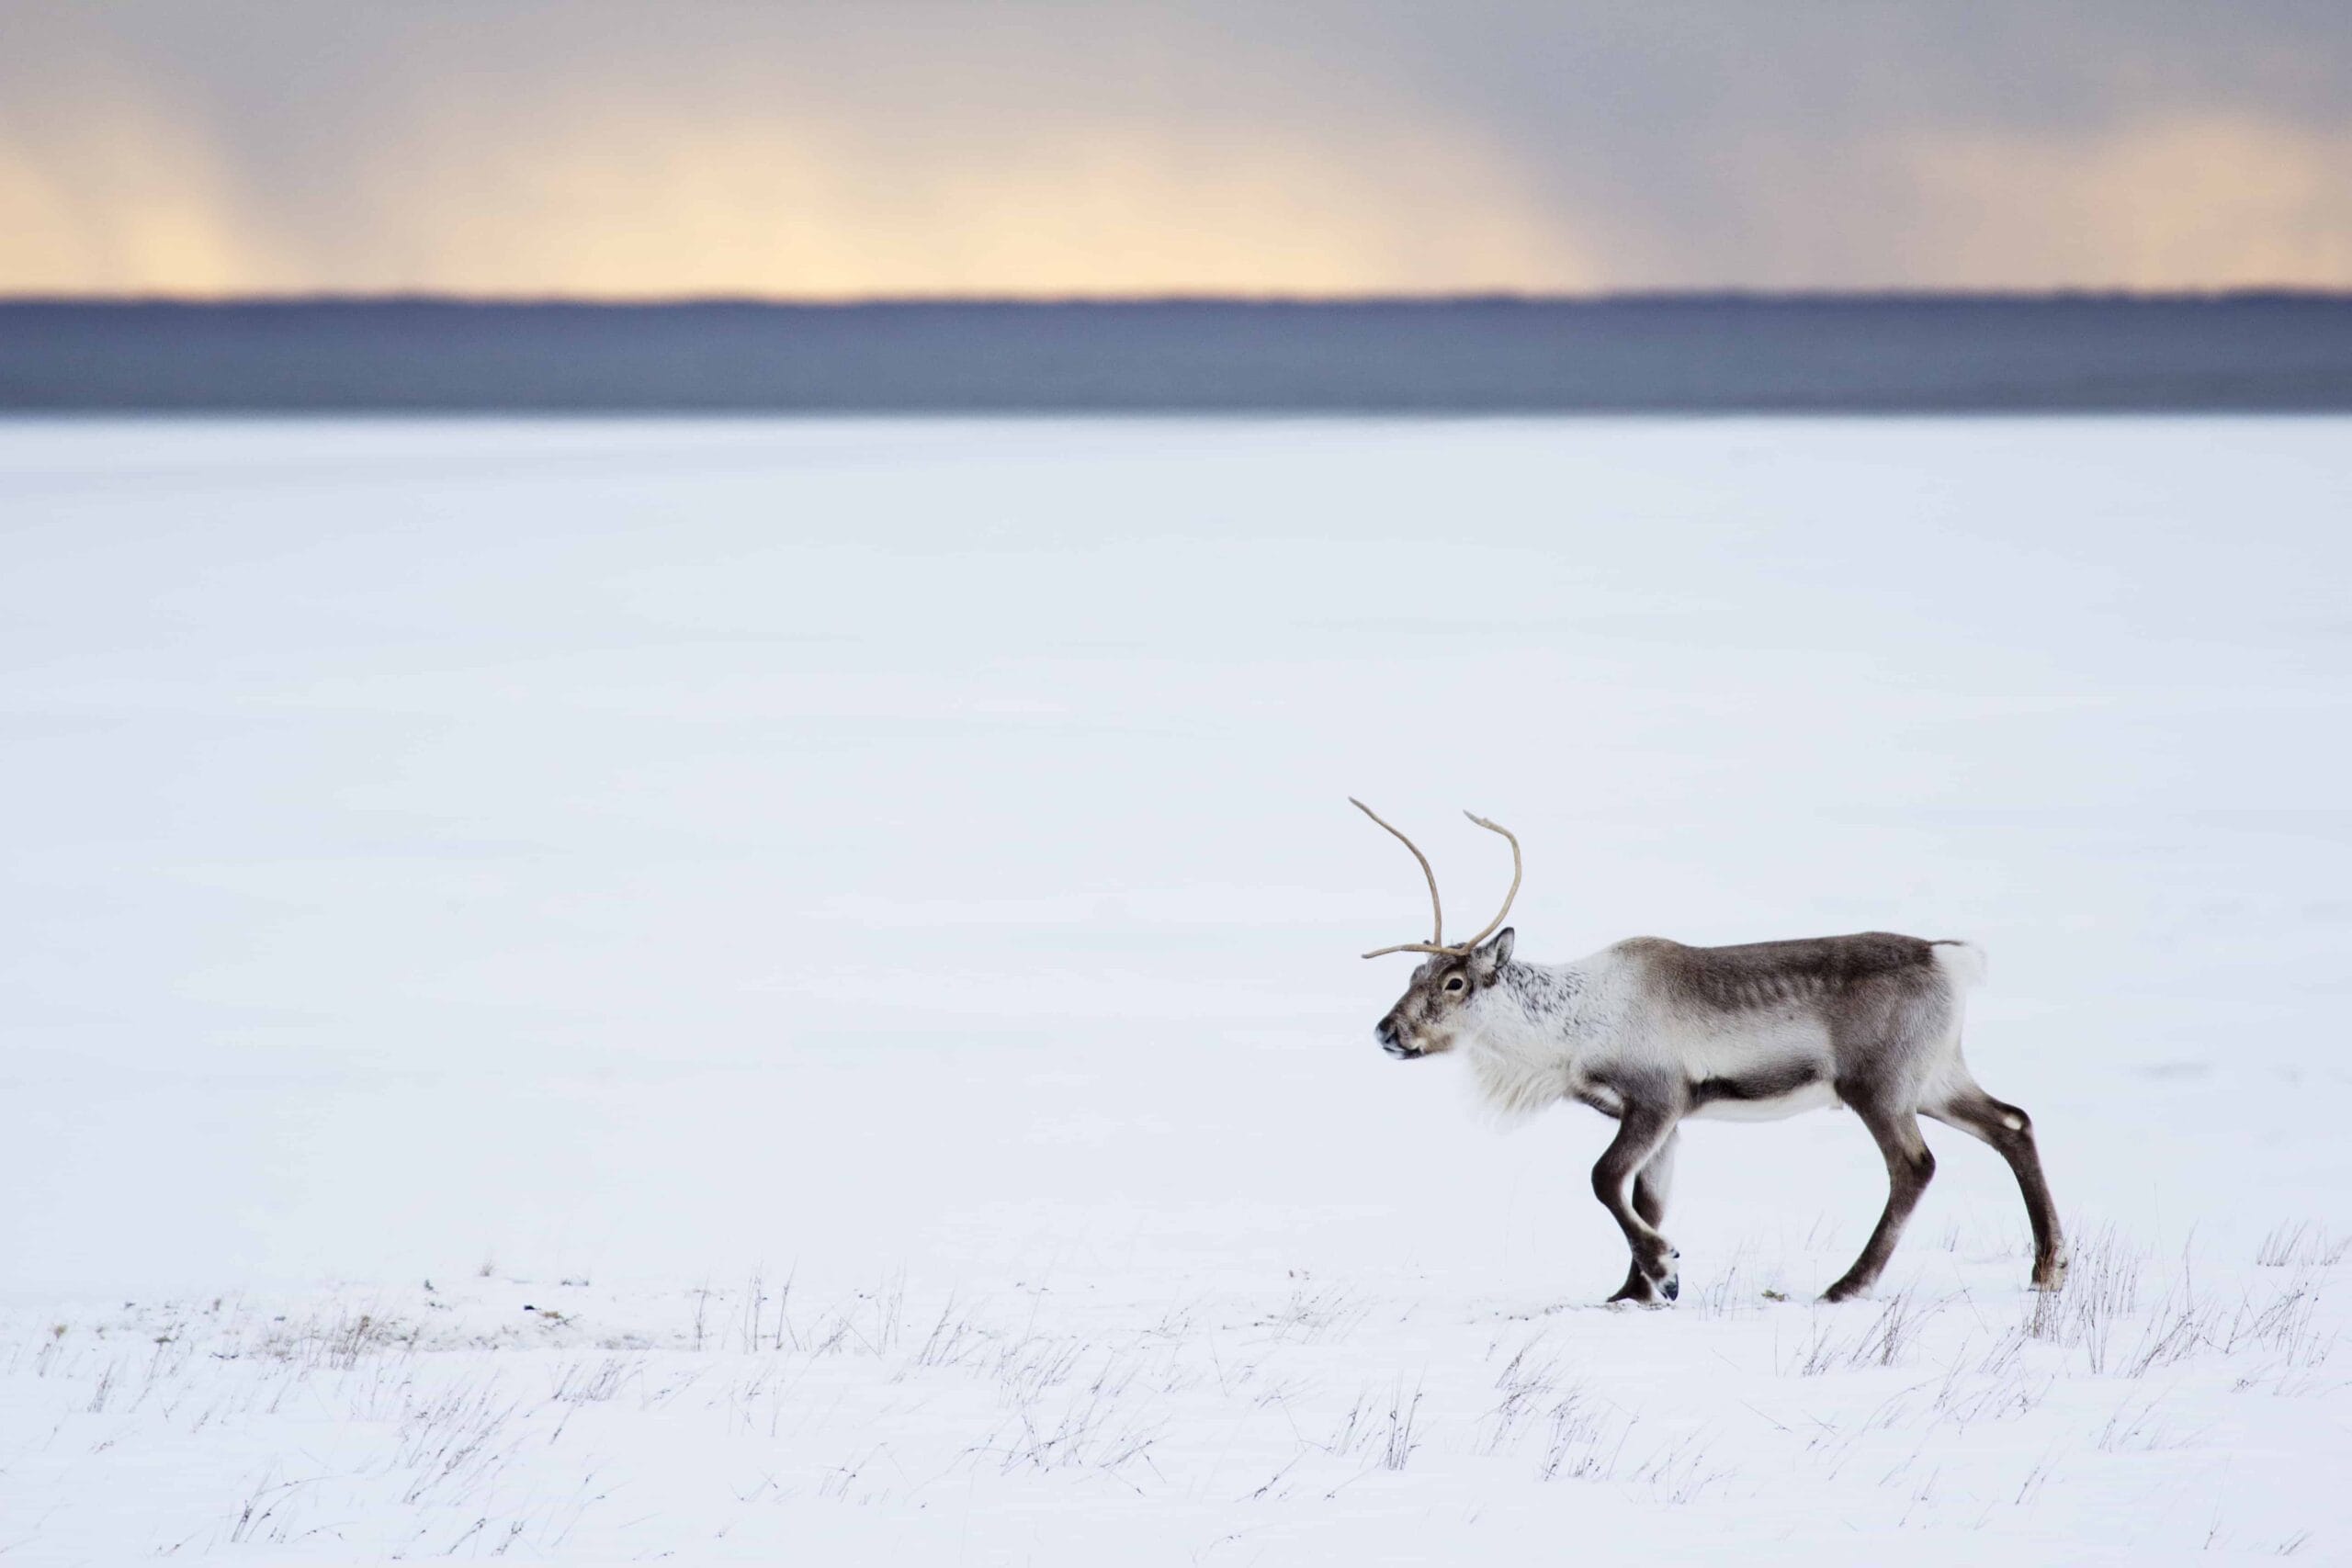 Searching for Wild Reindeer in Iceland? Here